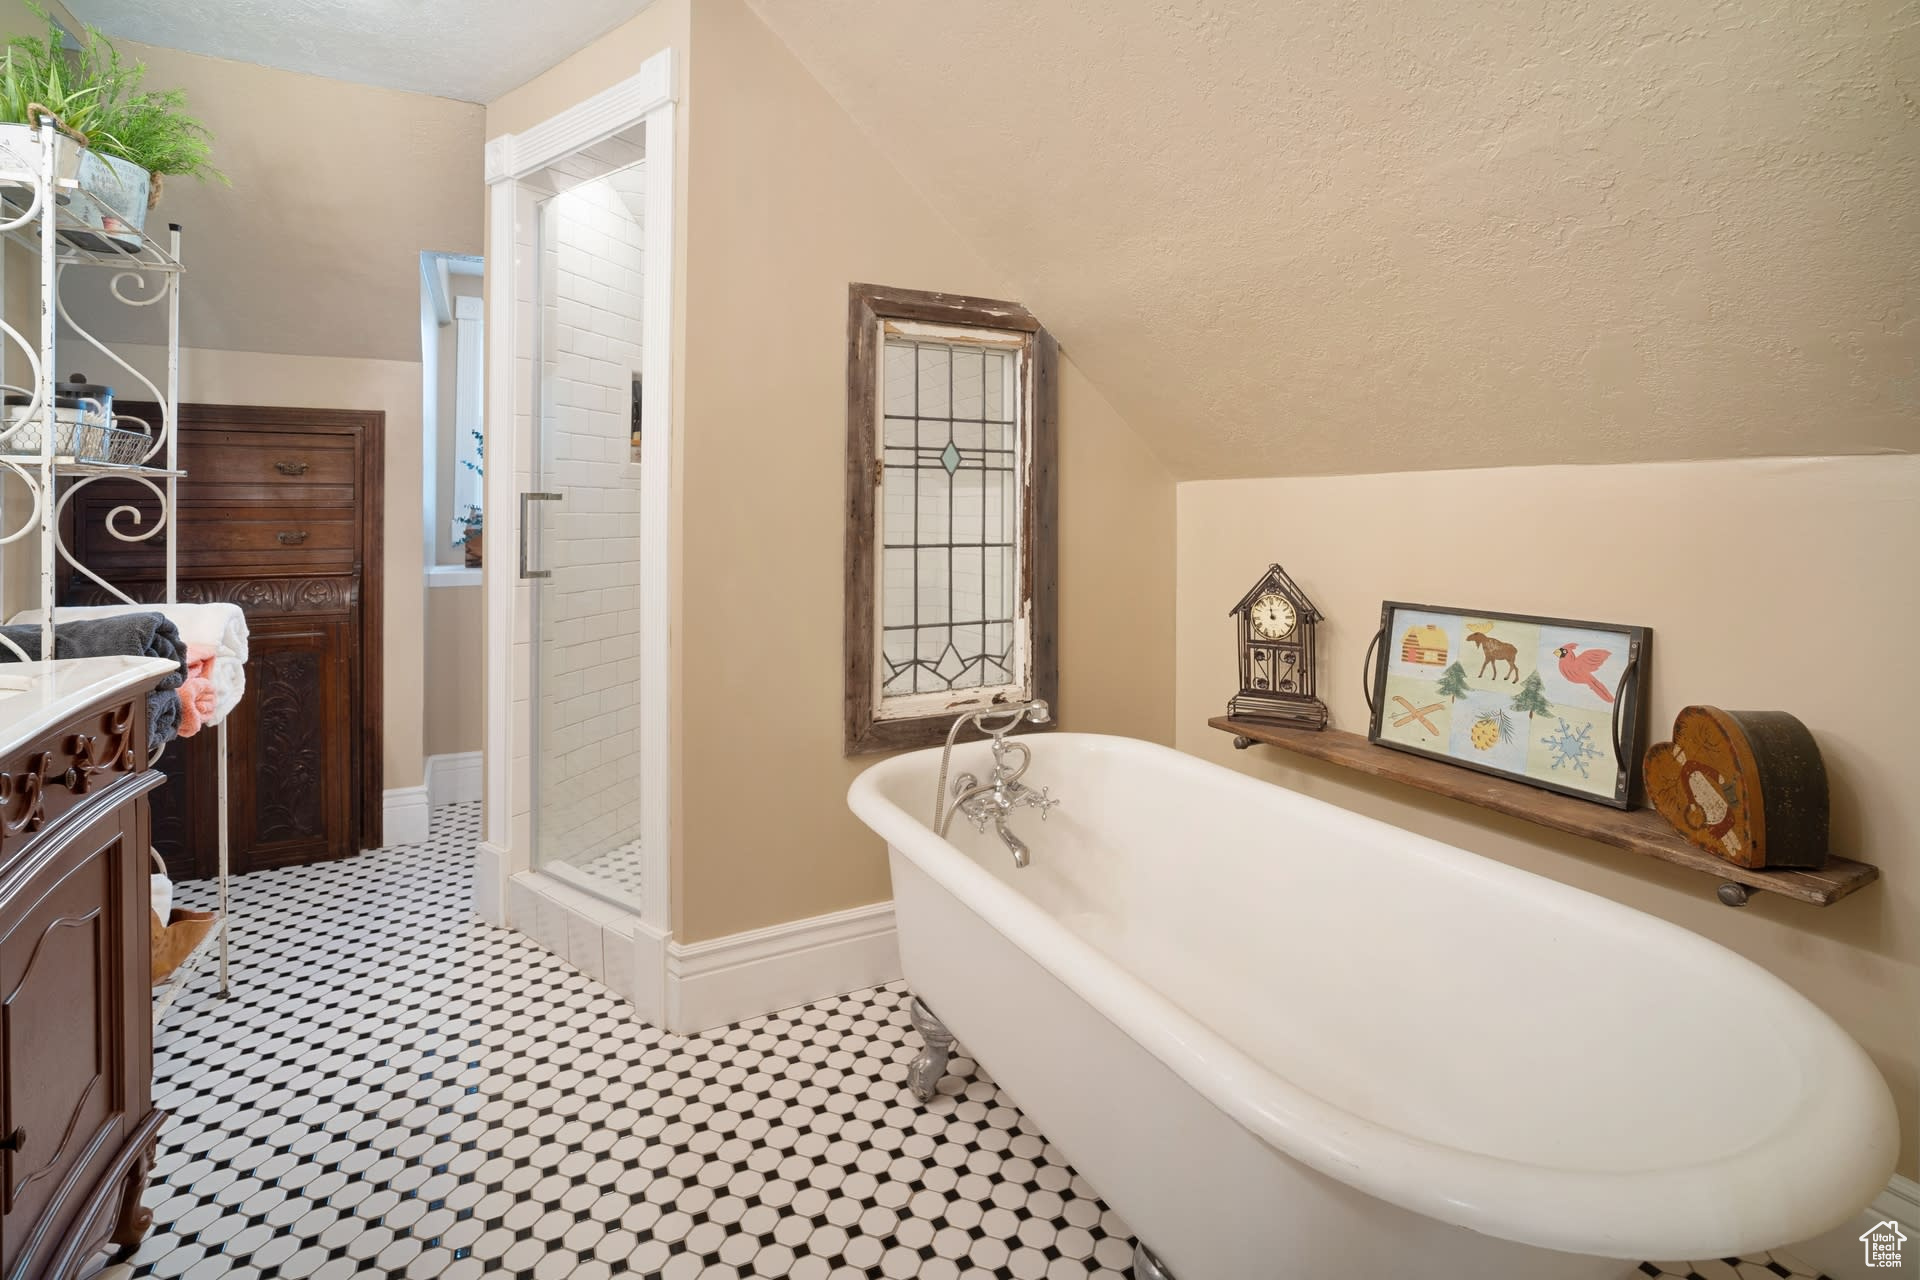 Bathroom featuring vanity, vaulted ceiling, a washtub, and a textured ceiling